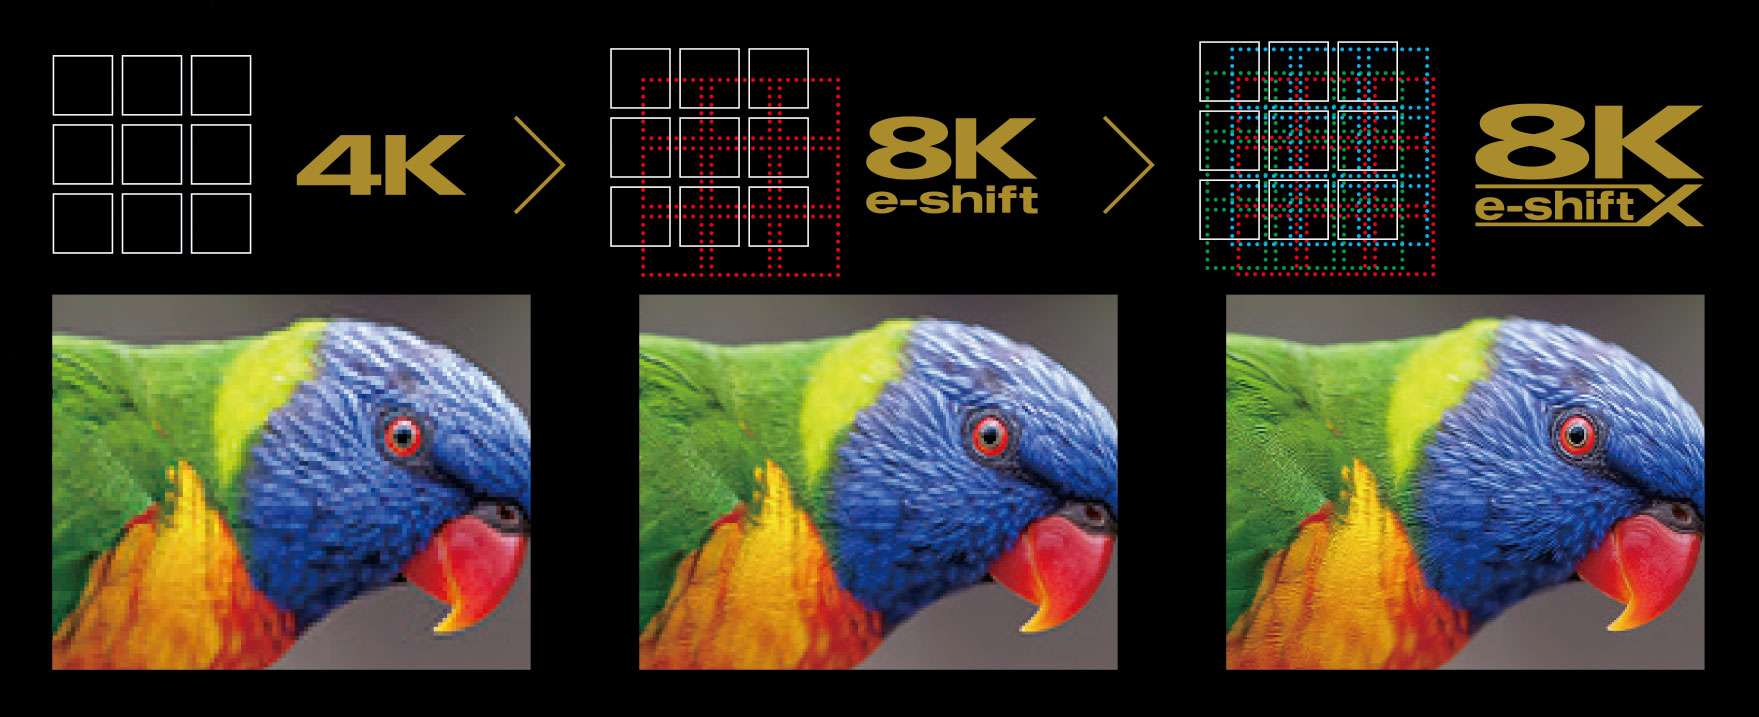 parrot with 4K, 8K eshift and JVC 8k eshiftX resolutions side by side